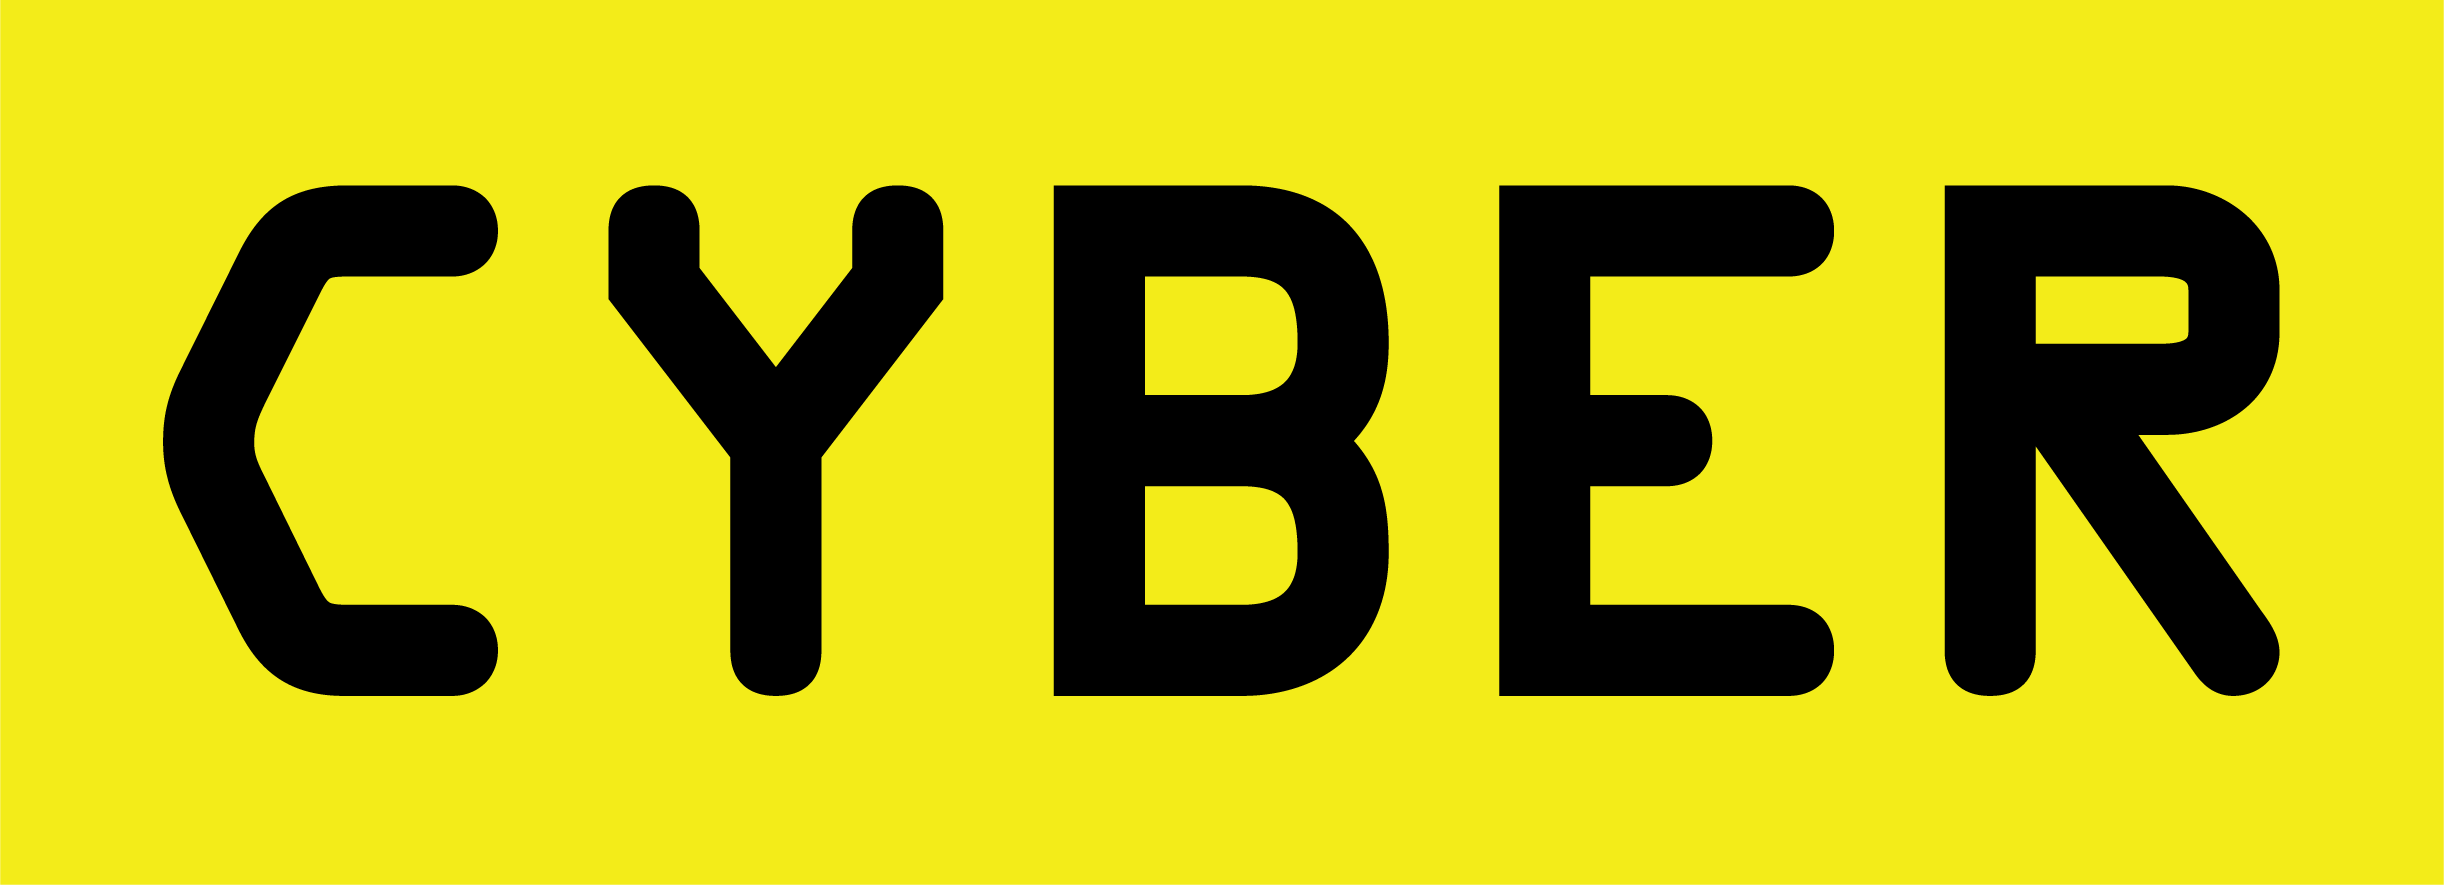 Cyber yellow 0122 61x192mm.png